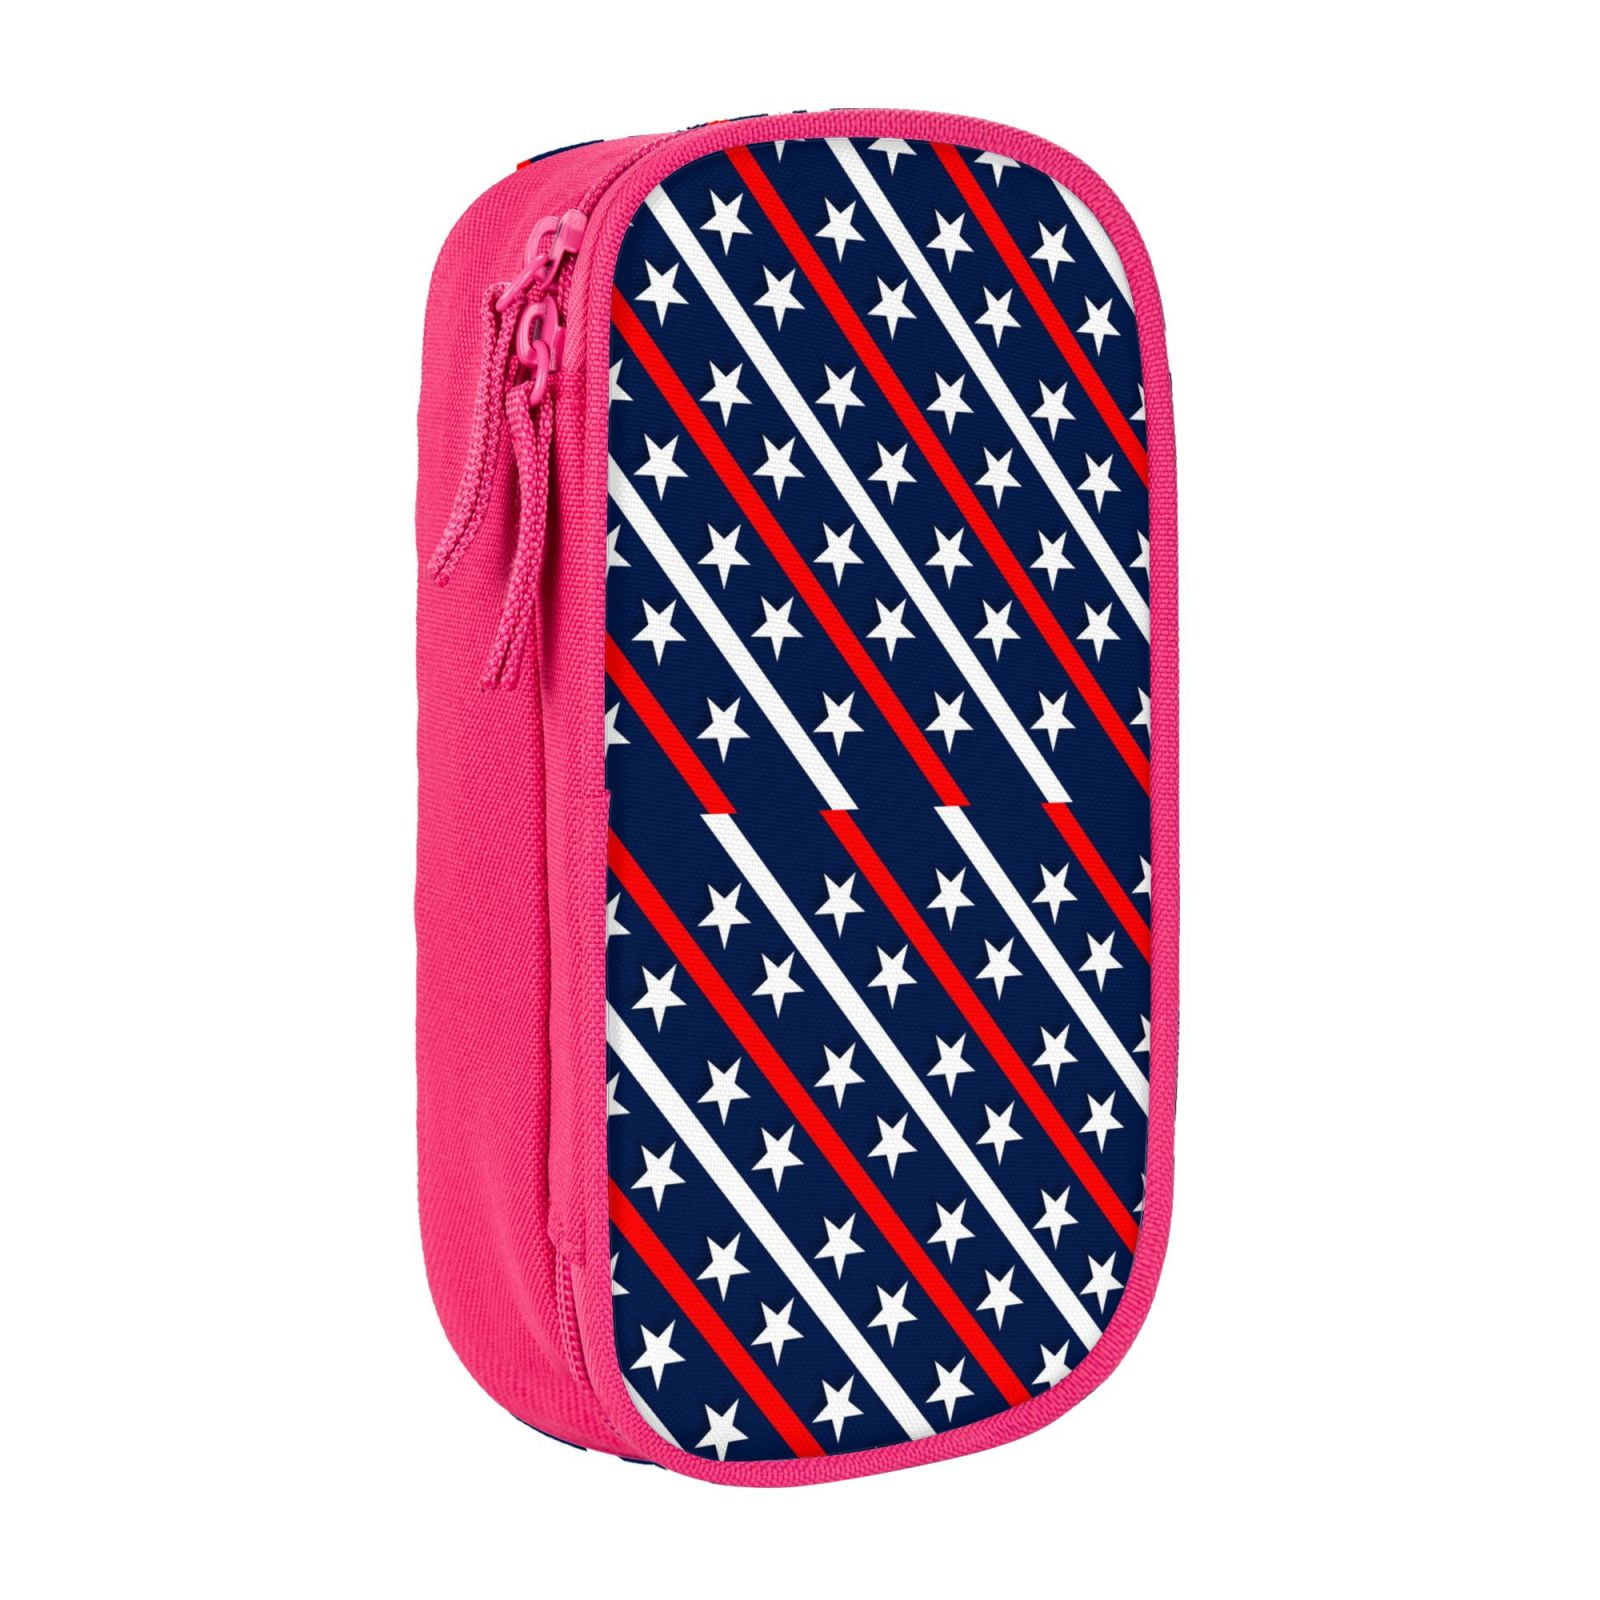 Stars XMXY Pencil Zipper Large Patriotic Case, White Compartments Portable Bags Strips Blue Pencil Capacity Blue Red with